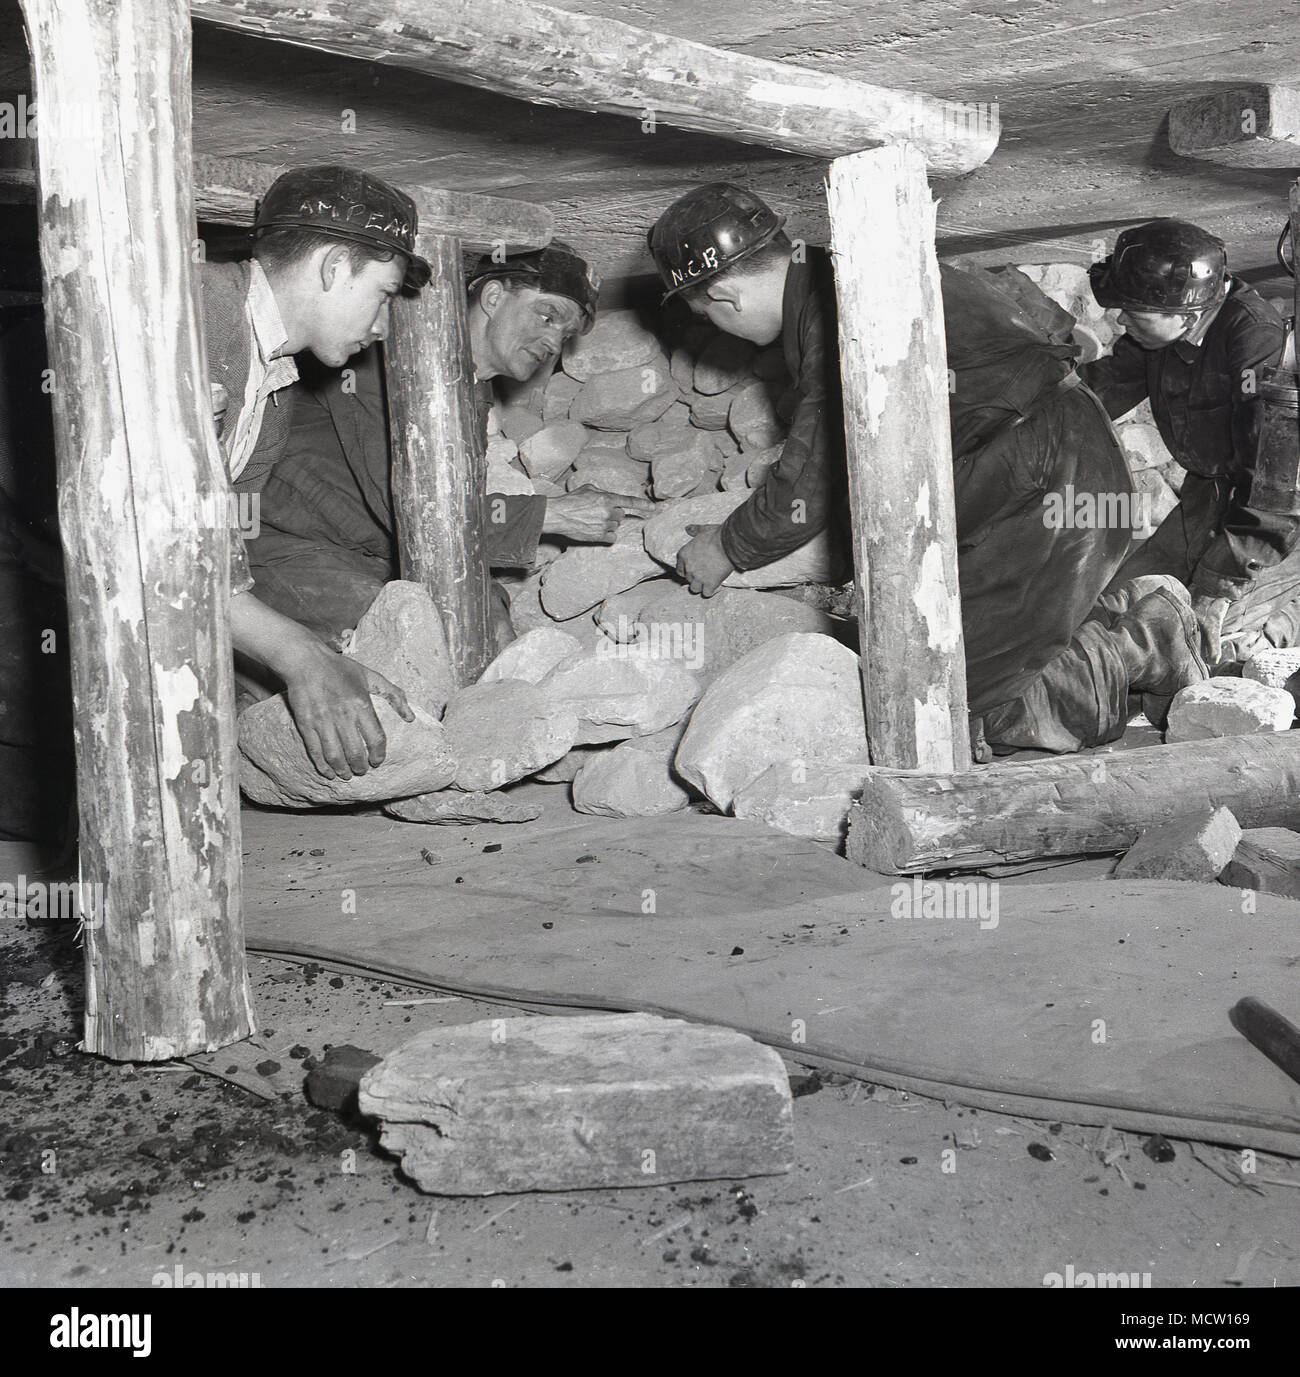 1950s, historical, Mining student being shown how to remove rocks safely in a confined underground coalmine, with its roof supported by timber beams on wooden props.  England, UK. in post-war Britain, mining was still an important industry with over 500 pits in existence and the government of the day actively encouraged young people to gain mining knowledge and skills and to enter the industry. Stock Photo